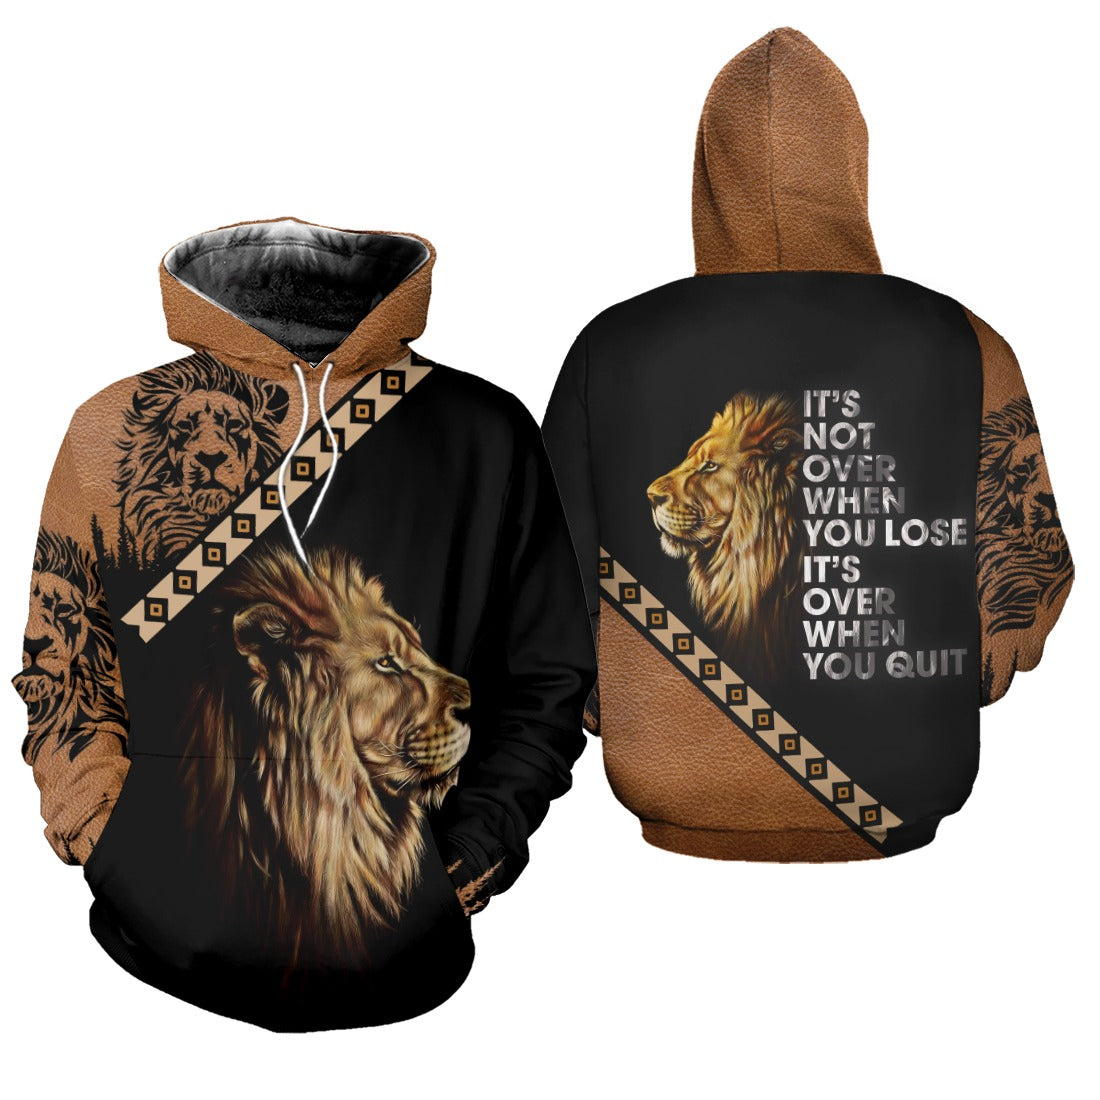 Lion King Lion It's Not Over When You Lose It's Over When You Quit 3D All Over Print Hoodie And Sweatshirt